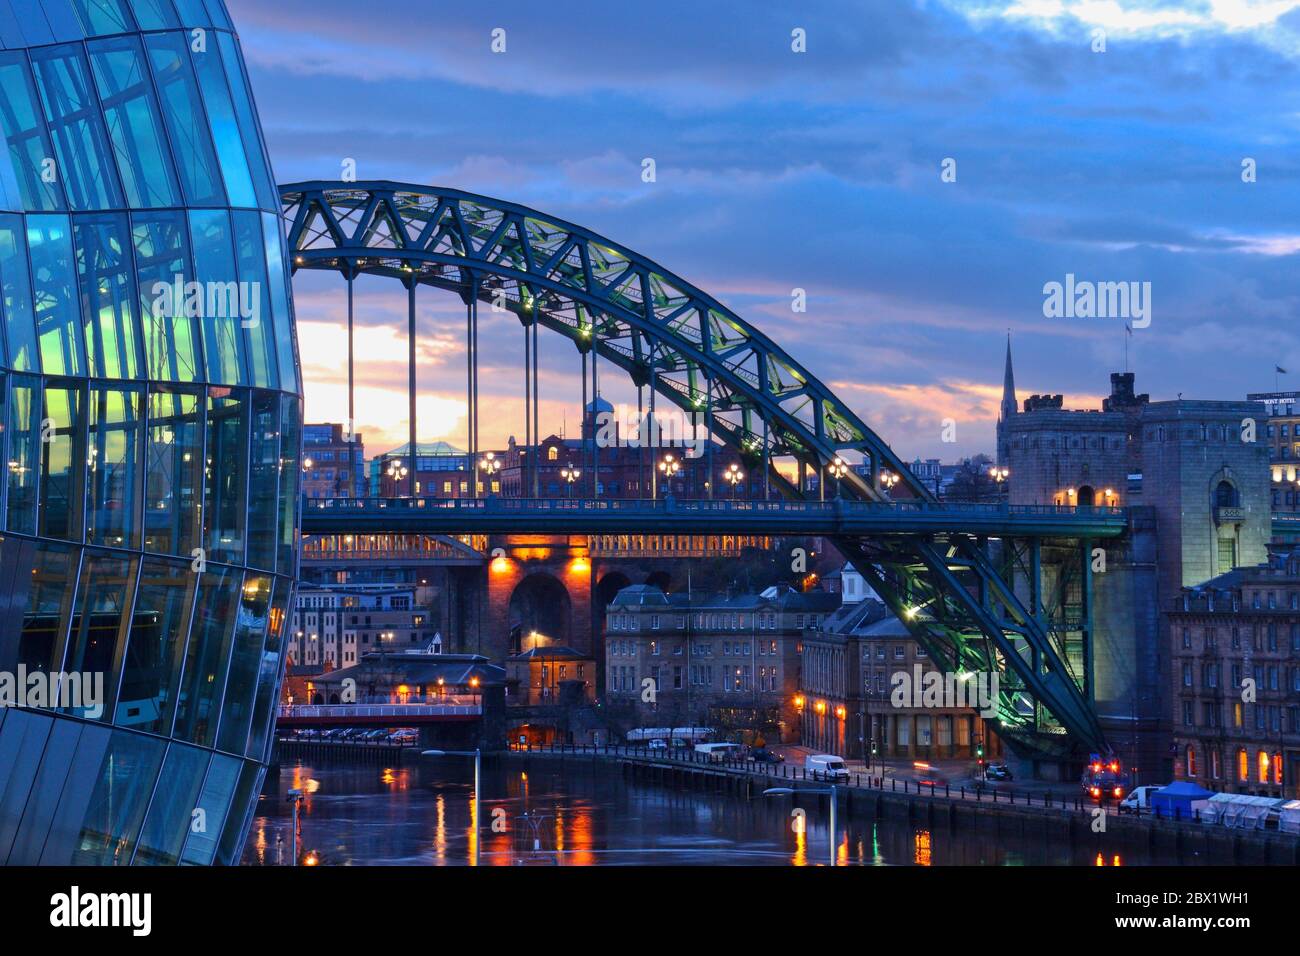 The arch of the Tyne Bridge  spanning the River Tyne joing Newcastle and Gateshead in Tyne and Wear taken at dusk with the Sage Centre glass windows i Stock Photo